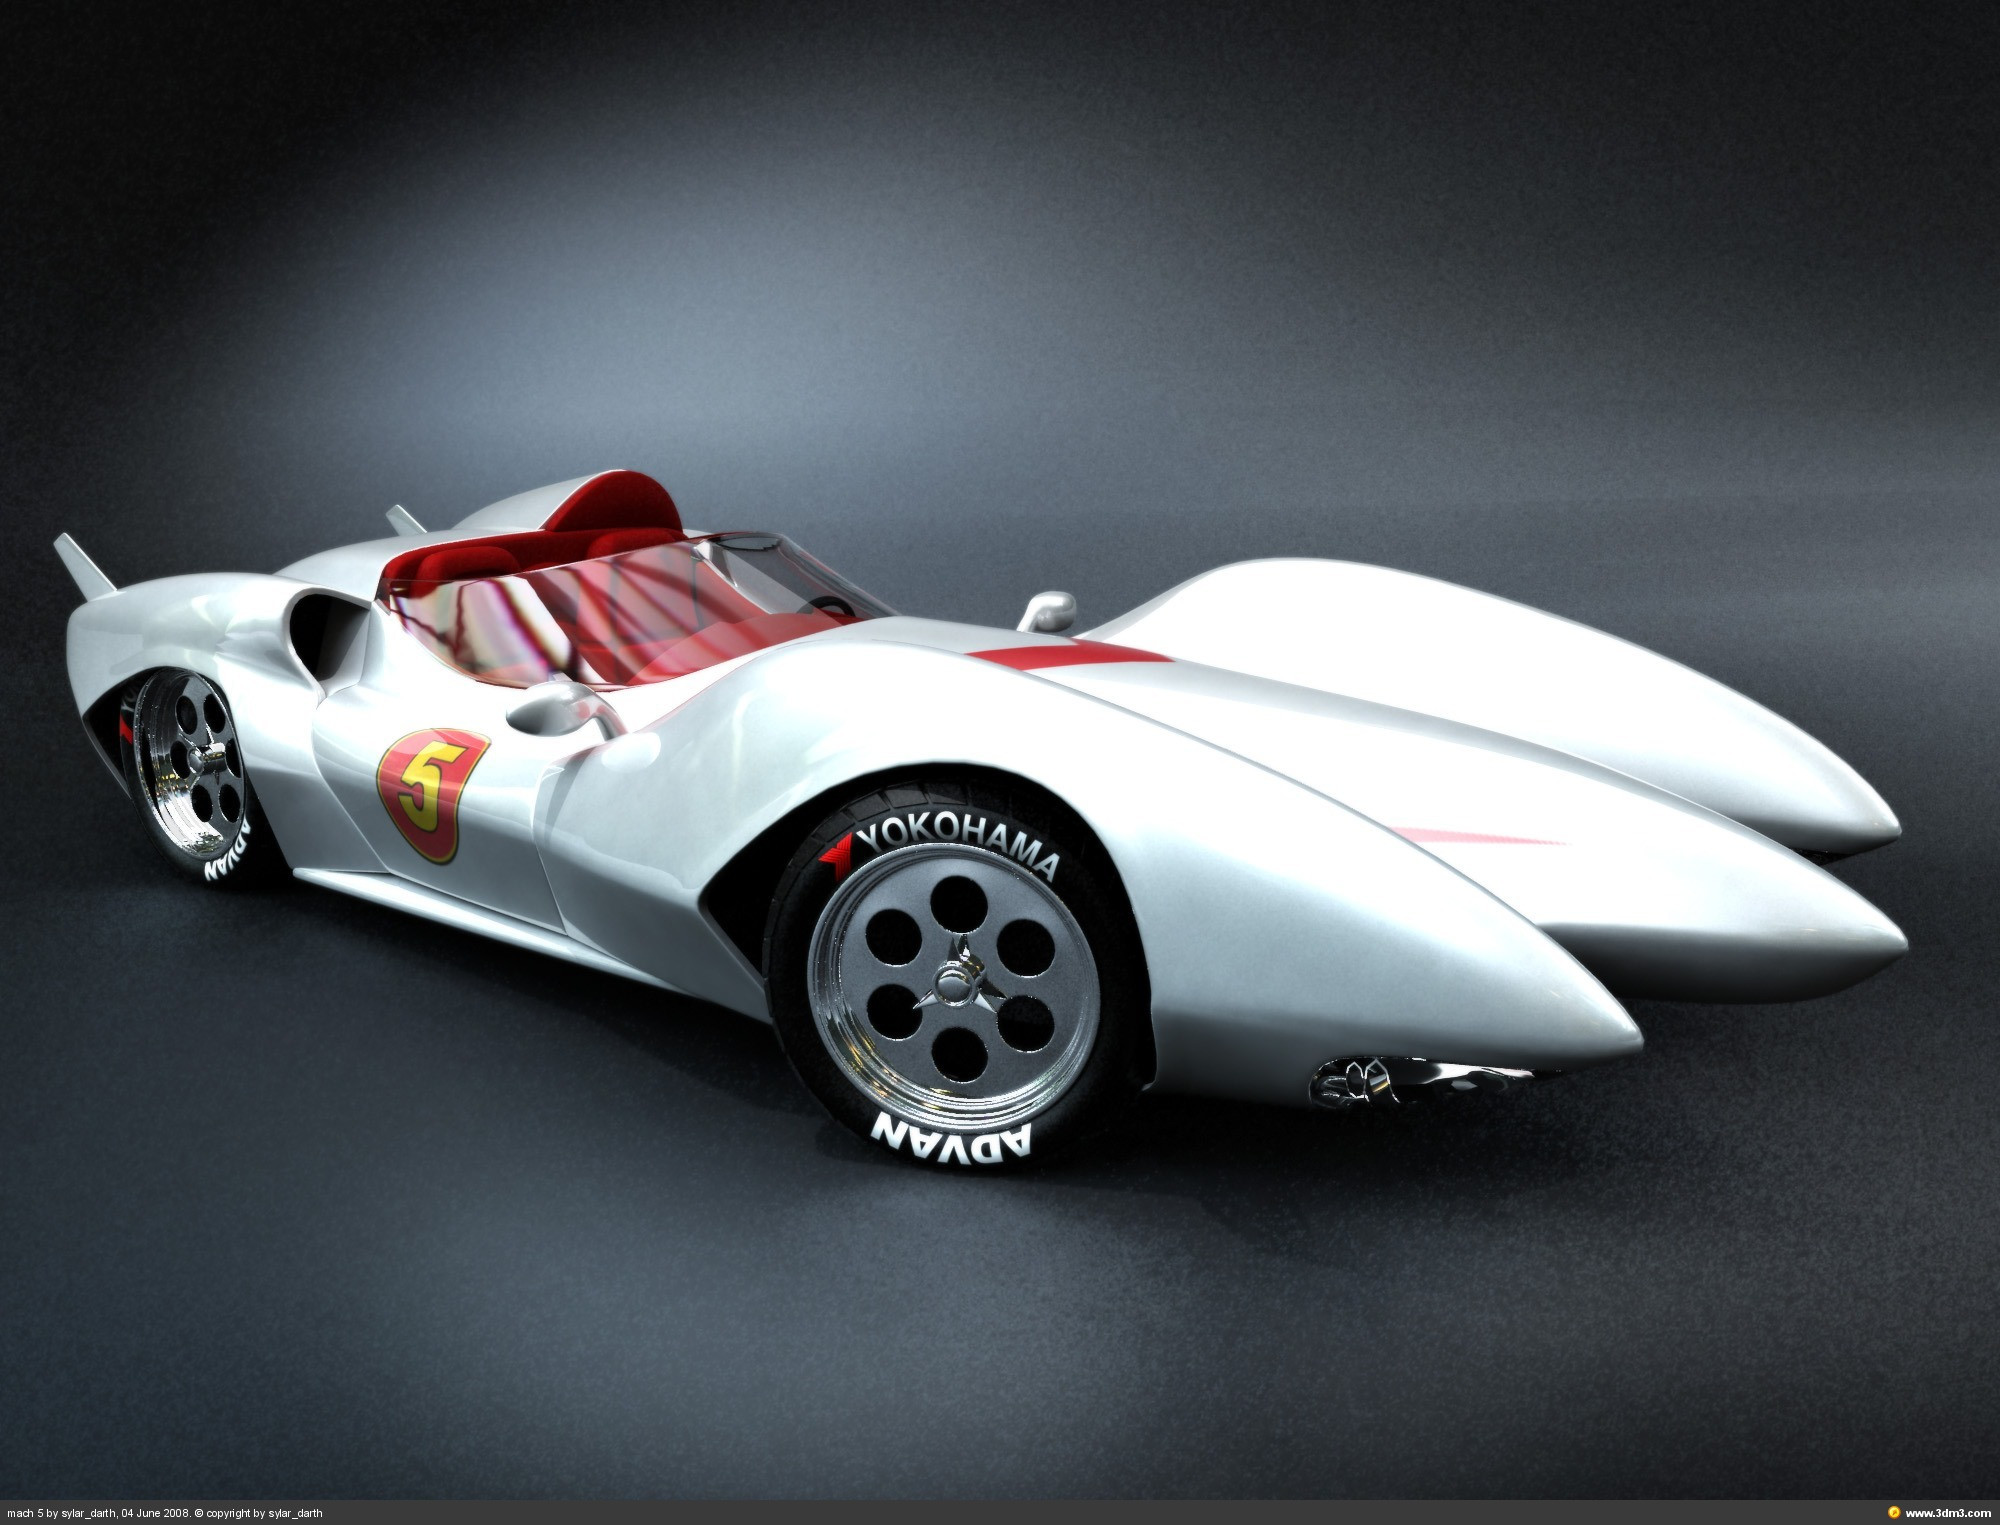 2000x1525 The Mach 5 from speed racer